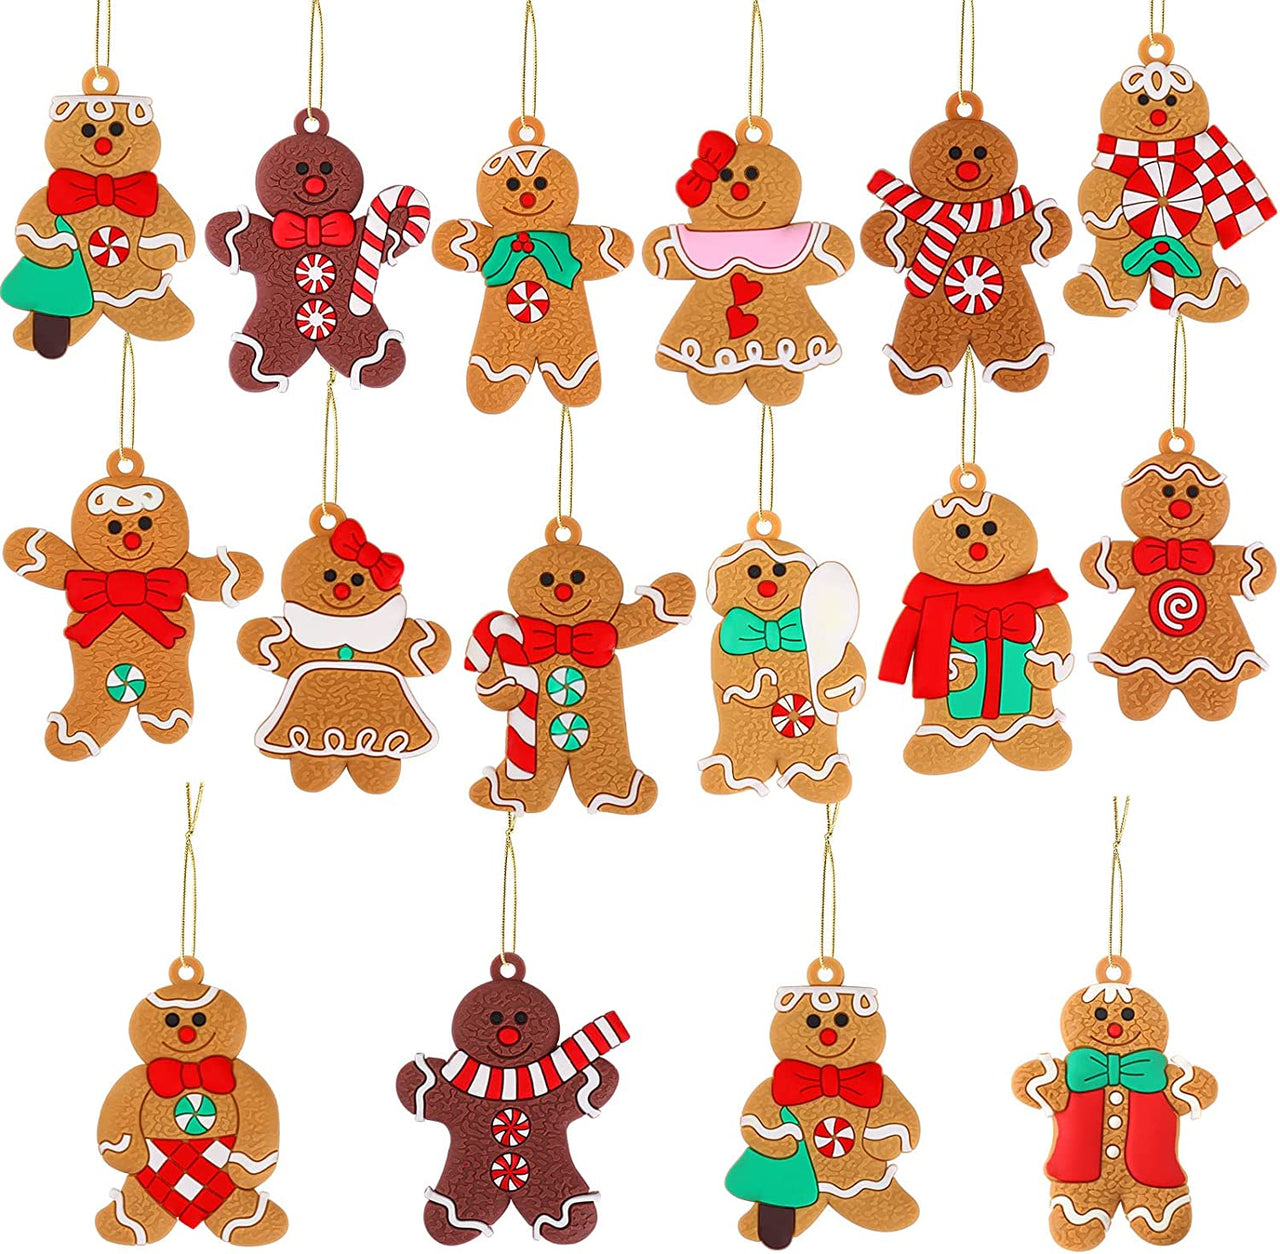 16pcs Gingerbread Man Ornaments Assorted Plastic Gingerbread Figurines Pendants for Christmas Tree Hanging Decorations Holiday Ornament Xmas Decor Party Favors Supplies